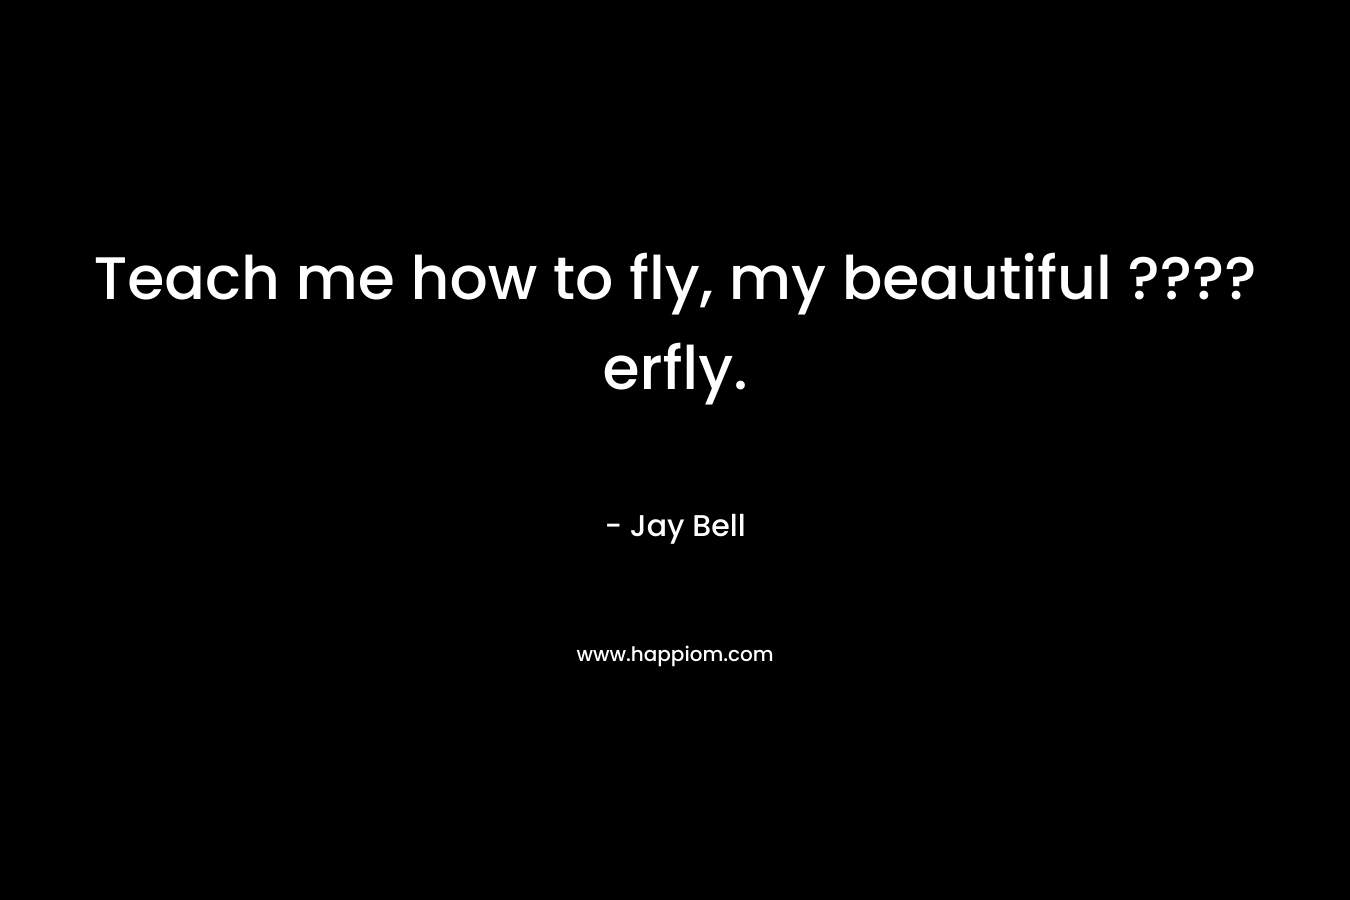 Teach me how to fly, my beautiful ????erfly. – Jay Bell